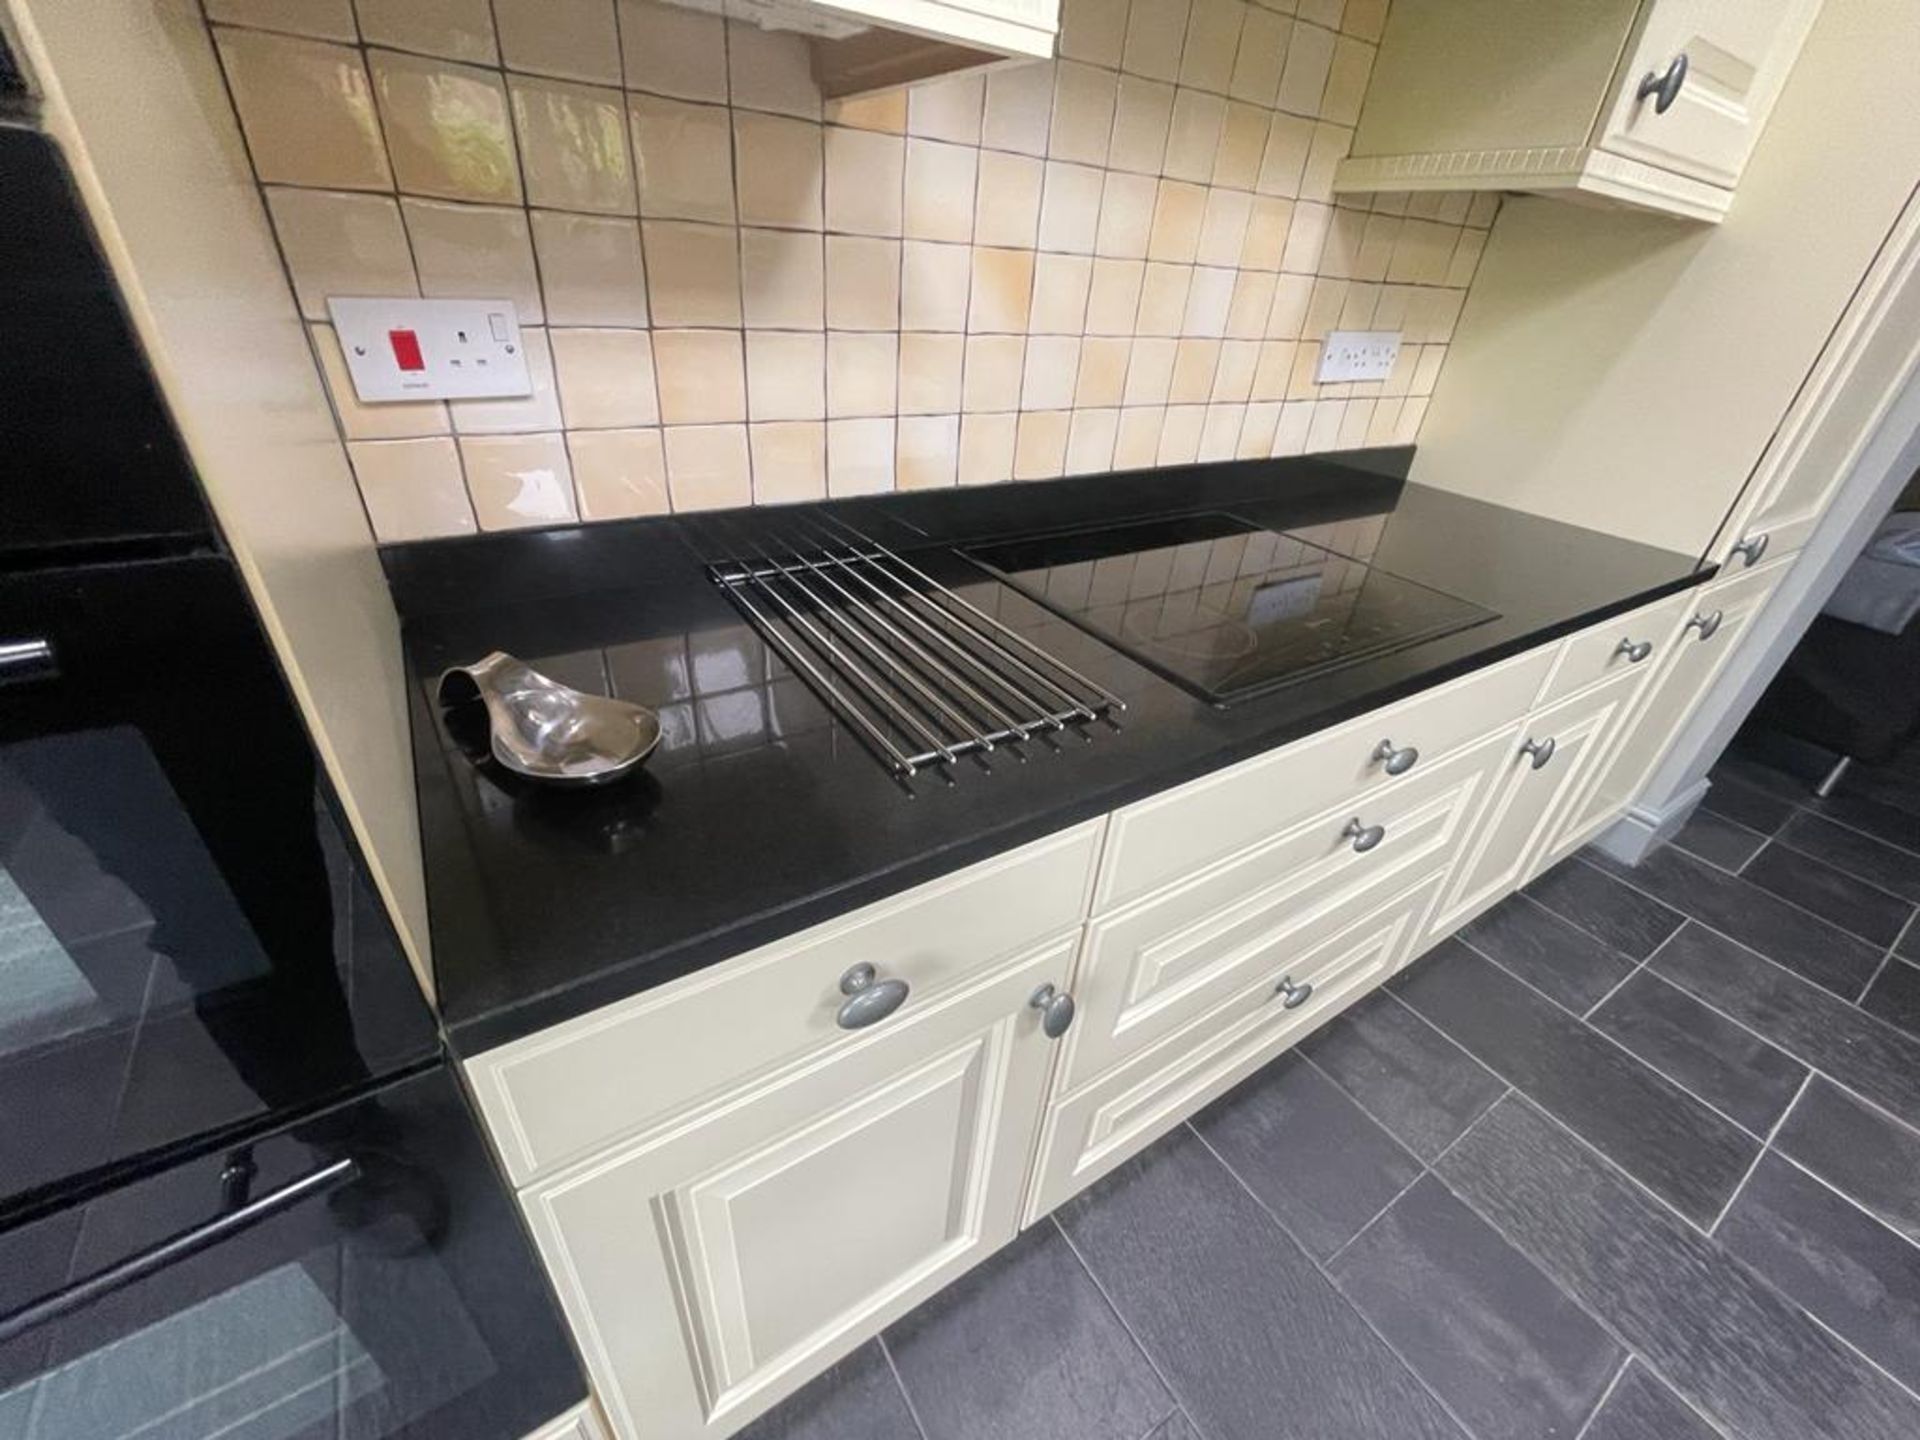 1 x Bespoke Keller Kitchen With Branded Appliances - From An Exclusive Property - No VAT On The - Image 28 of 127